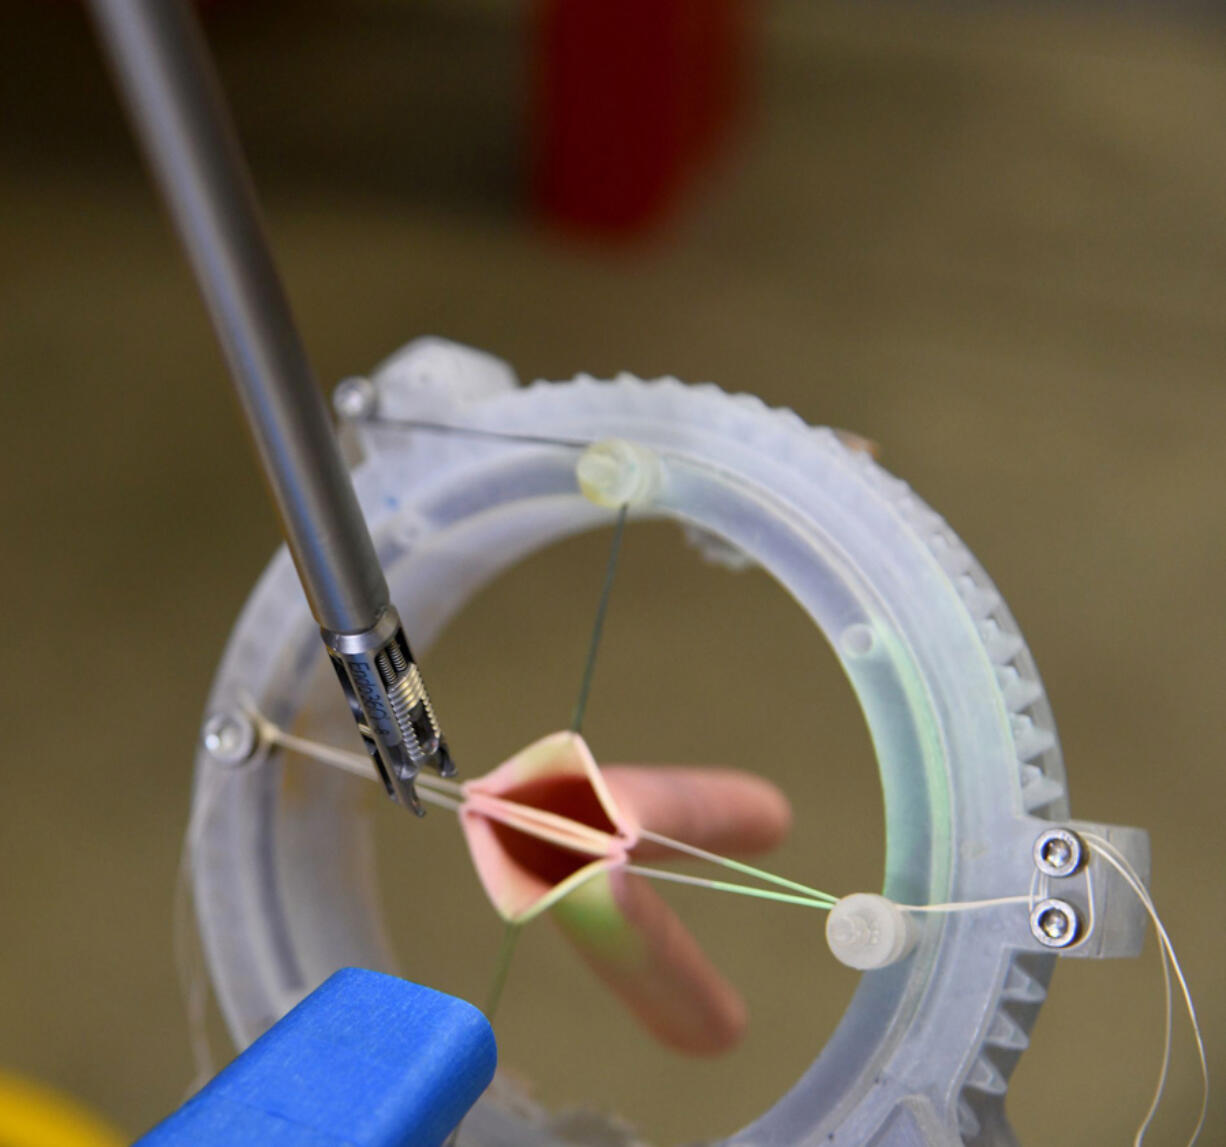 A team of mechanical engineers from Johns Hopkins University are developing a SMART robot (Smart Tissue Autonomous Robot) that can perform soft tissue surgeries. This is a detail of the robot's suturing arm working on simulated blood vessels.